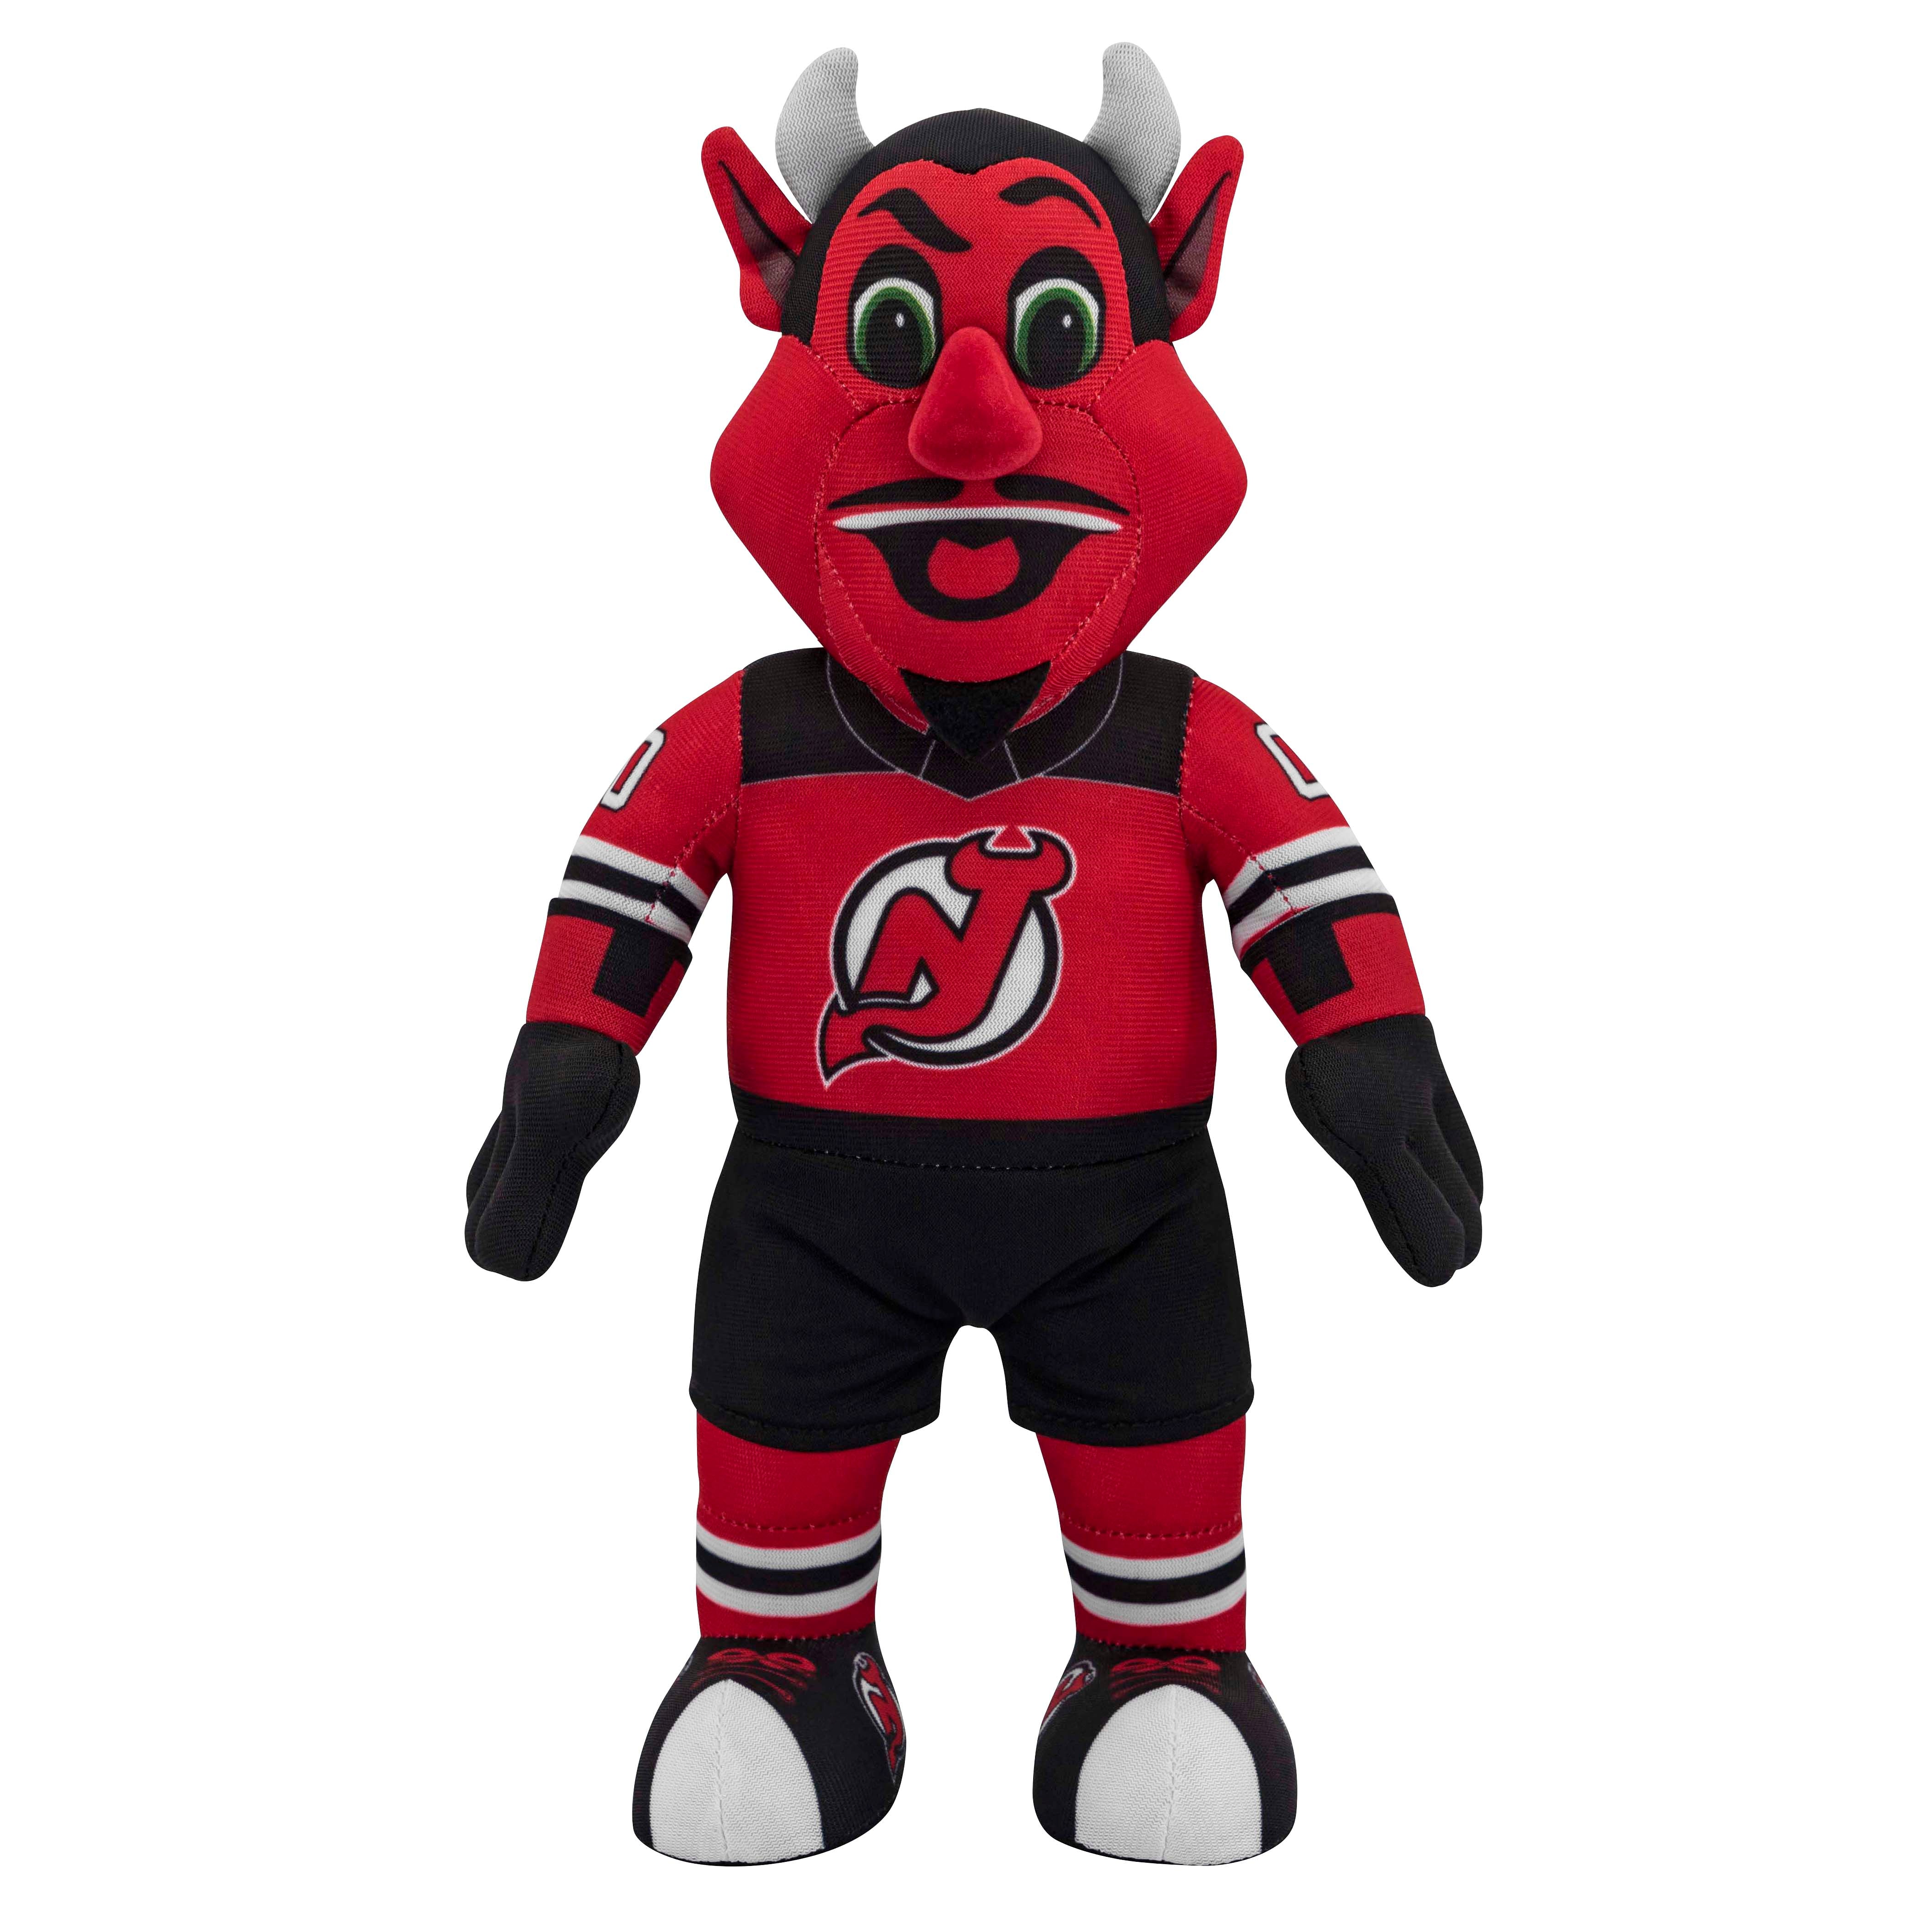 New Jersey Devils Mascot 95/96 Poster